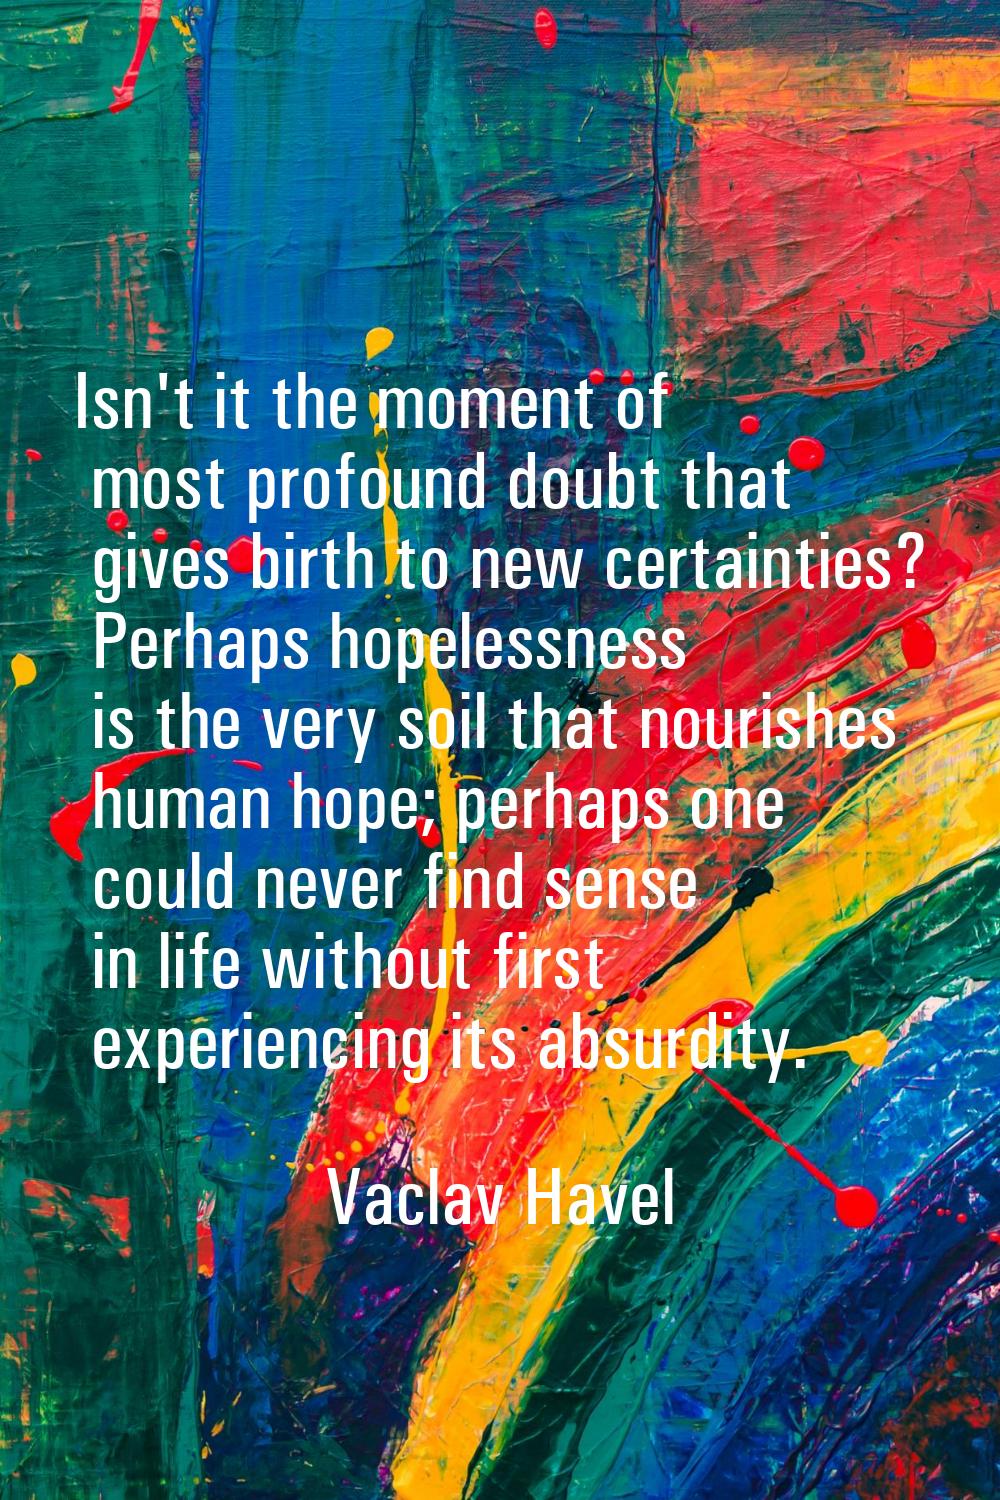 Isn't it the moment of most profound doubt that gives birth to new certainties? Perhaps hopelessnes